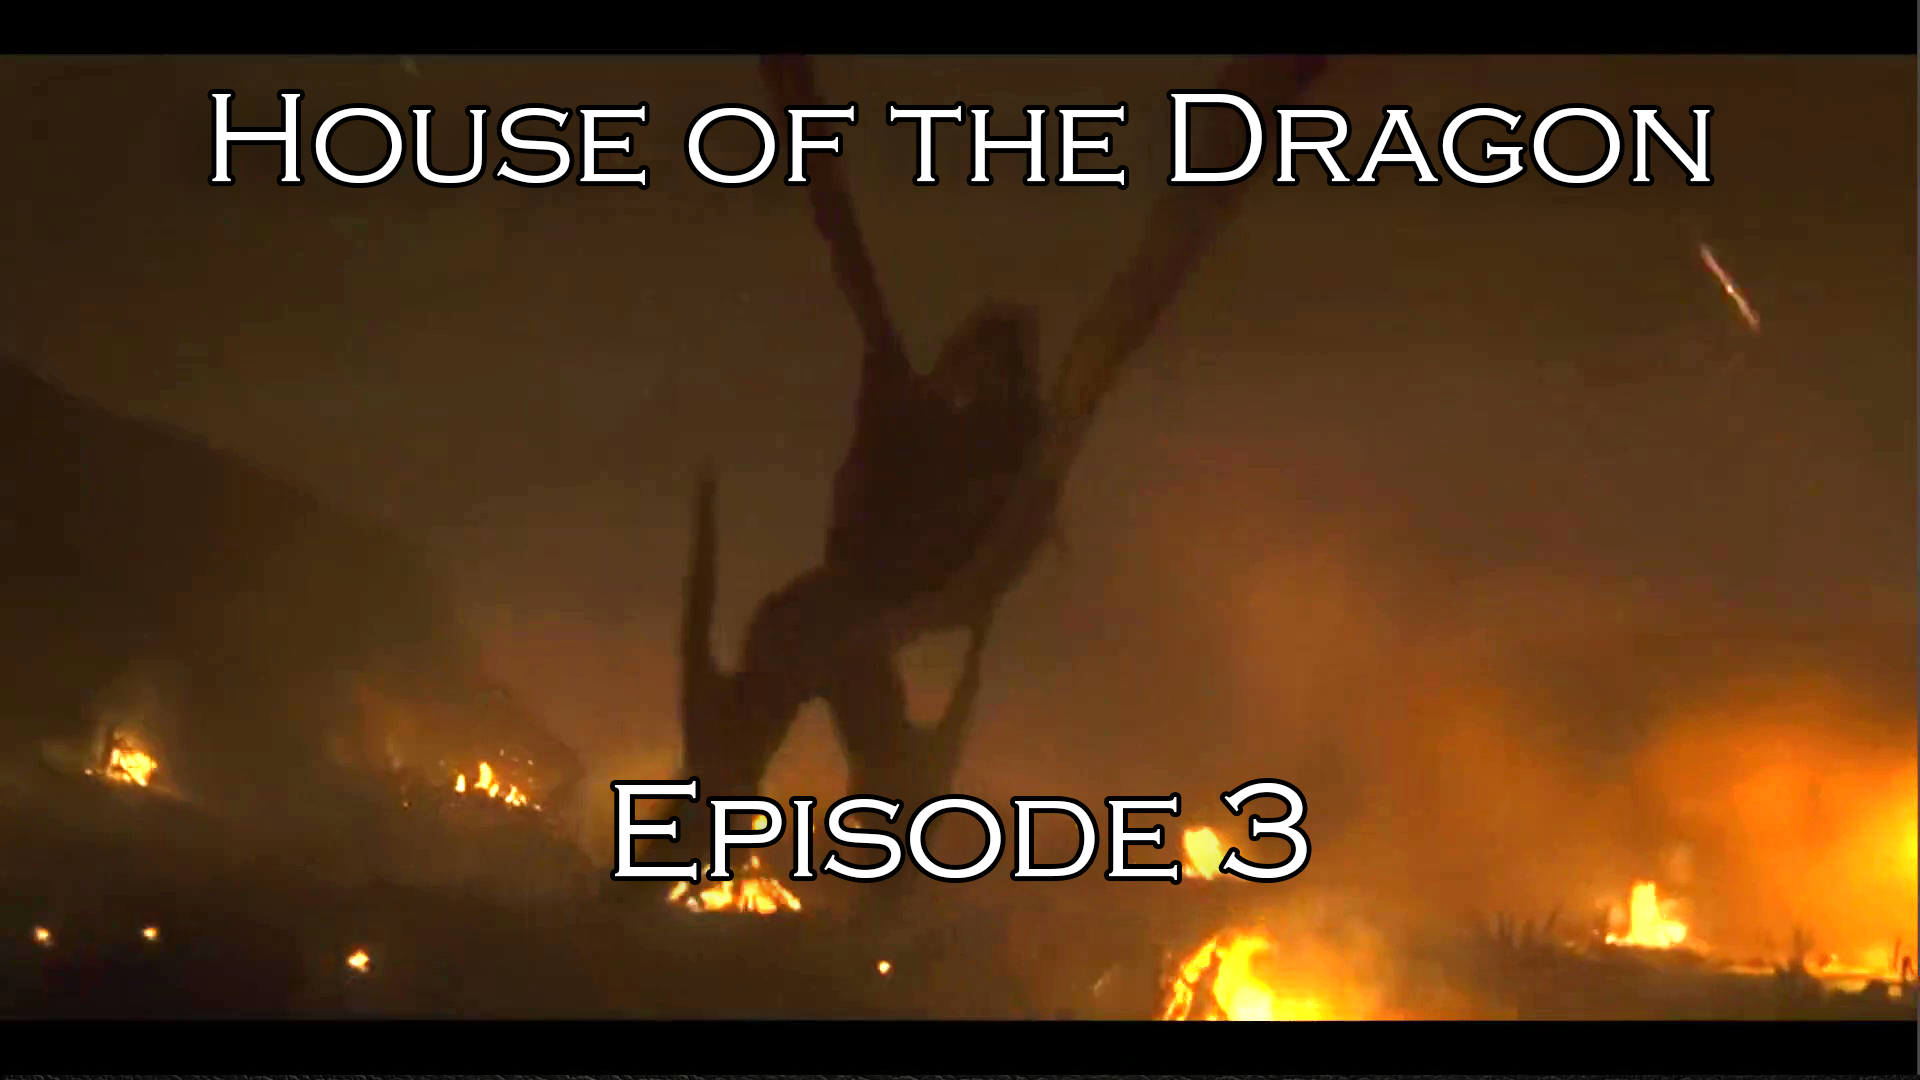 Video thumbnail for Episode 3 of House of the Dragon. Image is dark, with scattered small fires, and a dark figure of a large dragon taking off into the air from the ground.